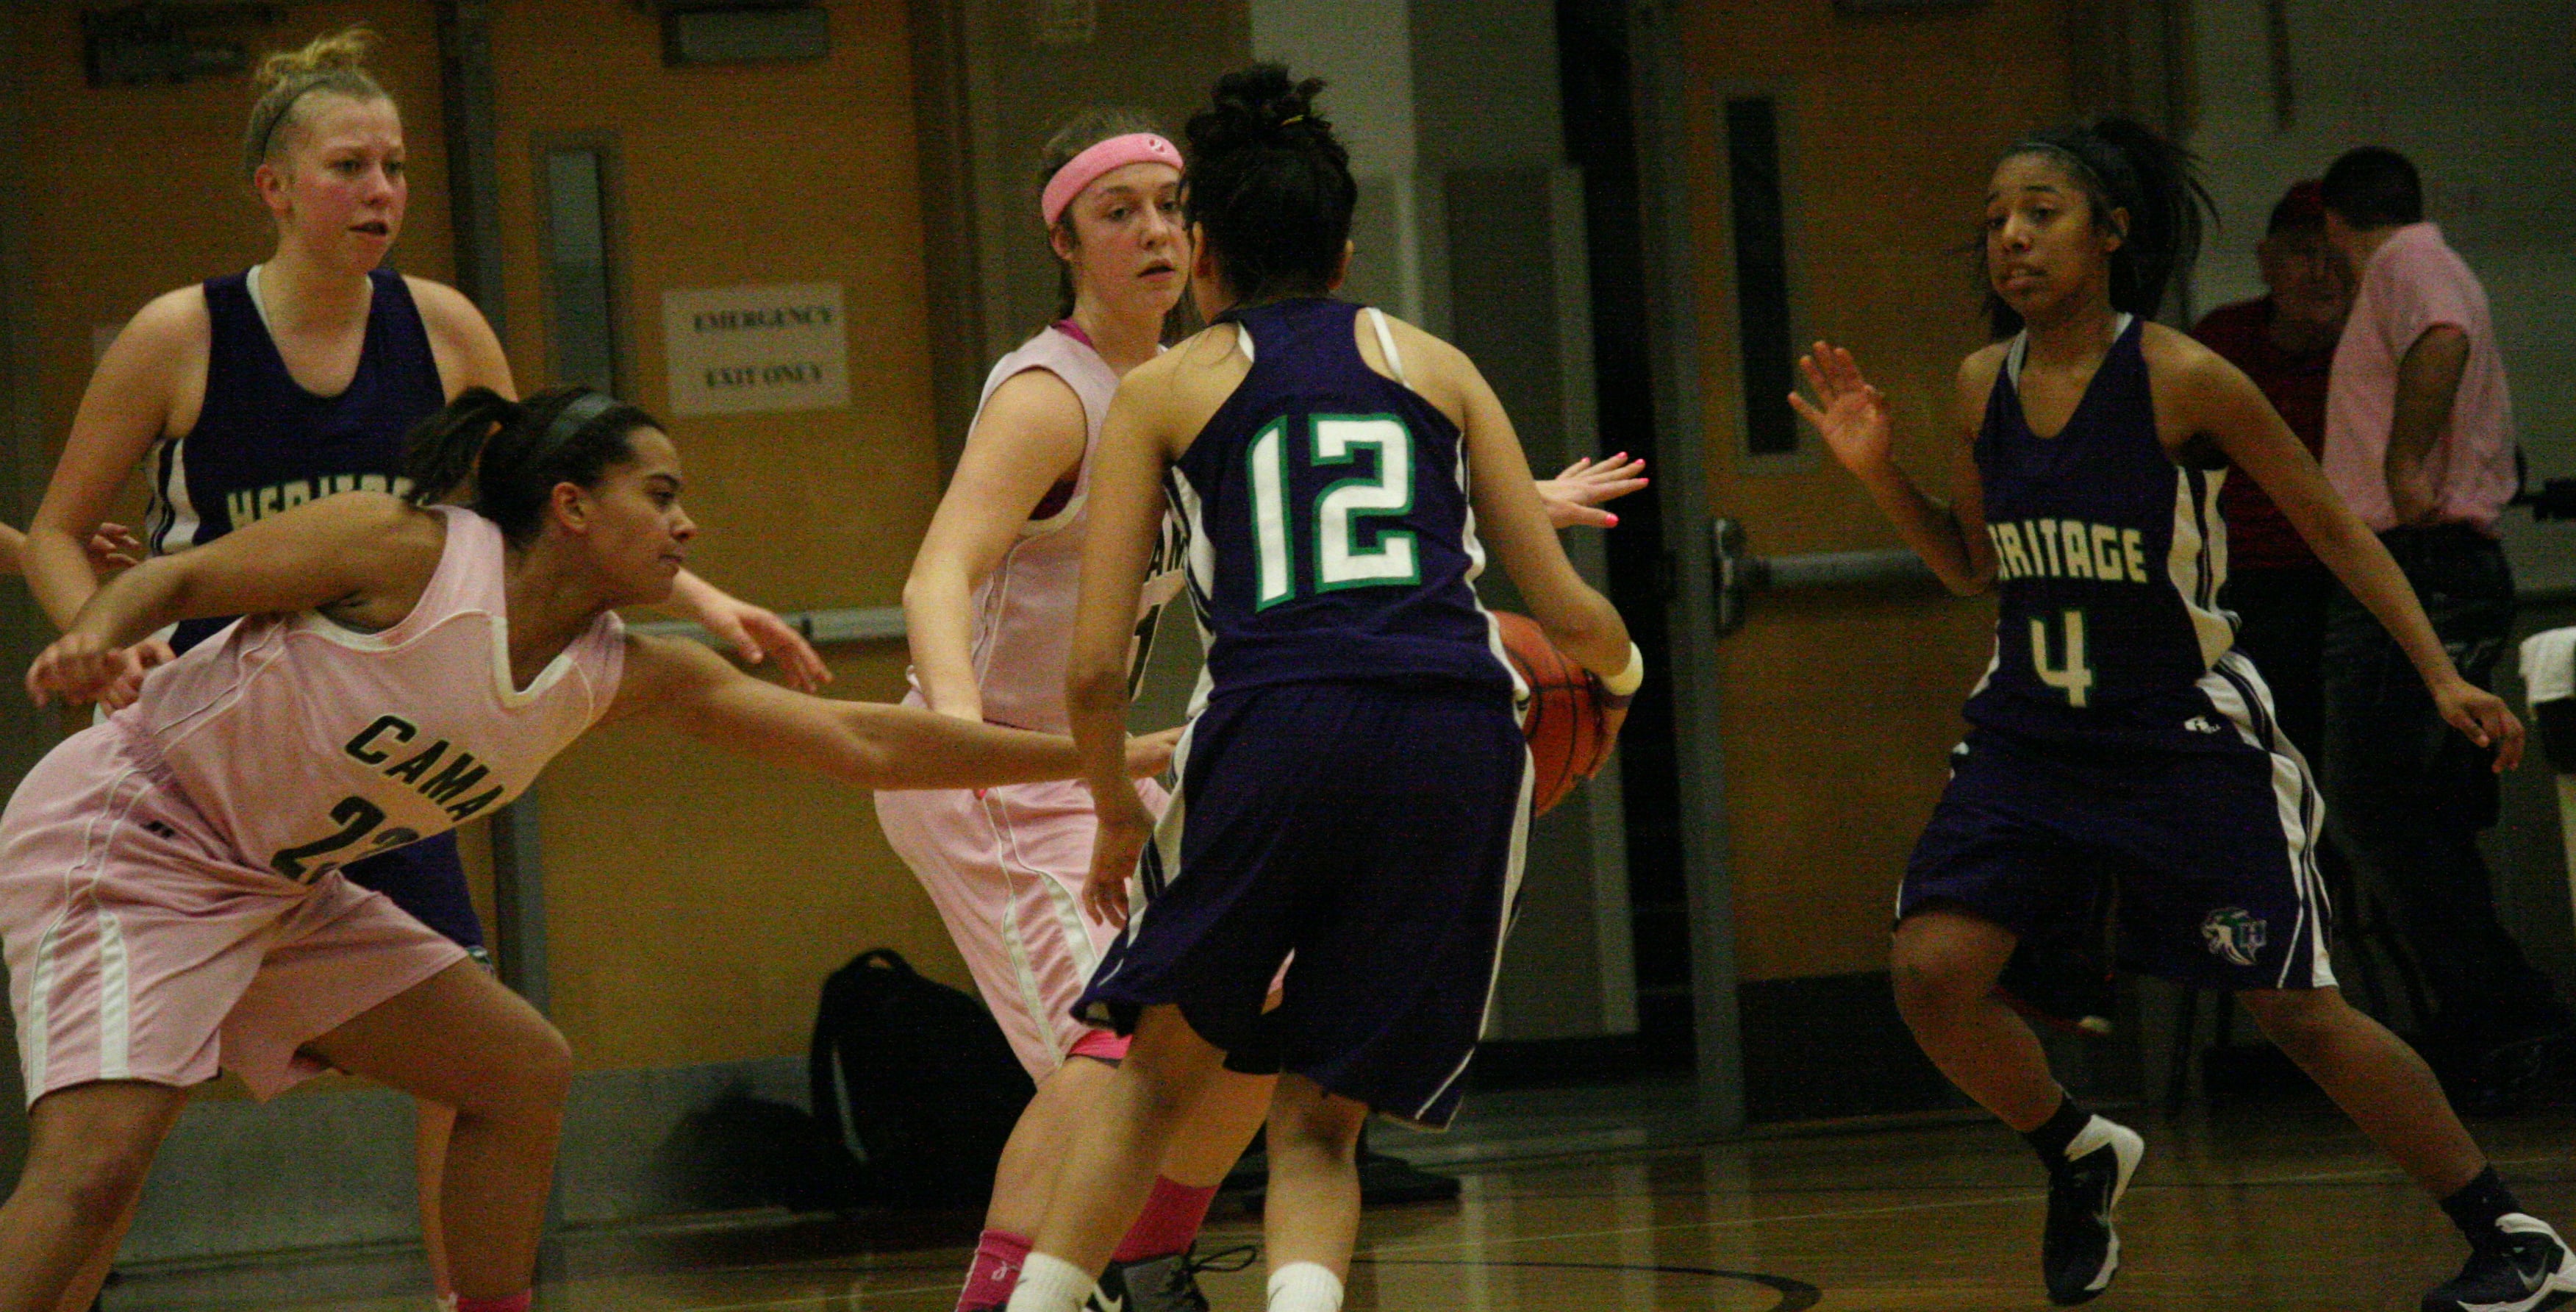 Rachel Gray and Teague Schroeder on the defense.